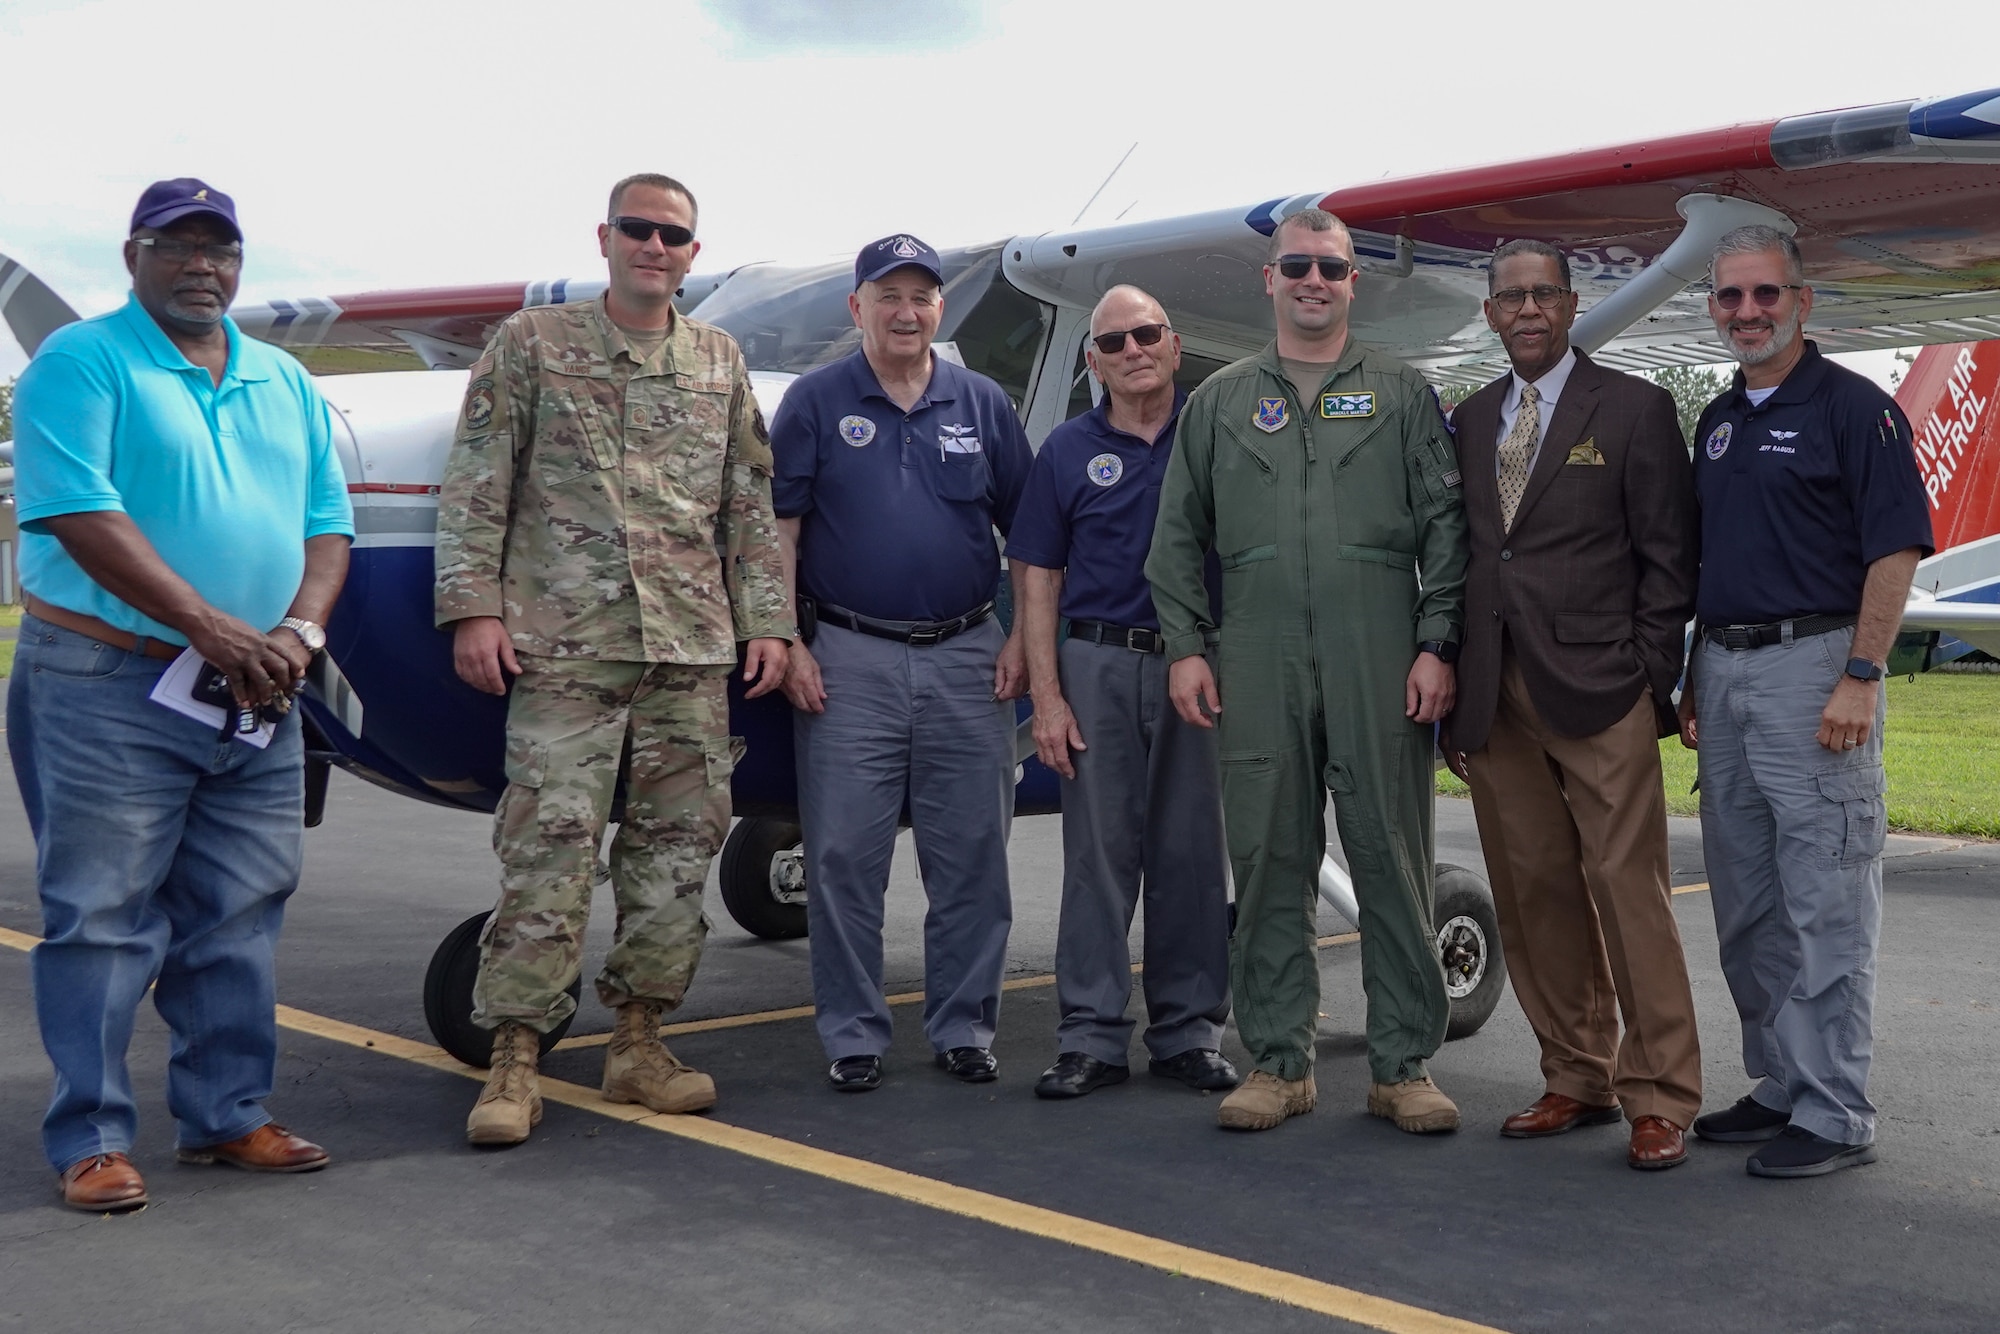 Airmen from the 2nd Bomb Wing flight safety office and members from the Shreveport Civil Air Patrol, pose for a photo at Jonesboro Airport during a Mid-Air Collision Avoidance safety training May 28, 2021. MACA is a program where members of the flight safety office travel to various airports spreading general awareness of hazards in the area, educating local aviators by answering their questions and avoiding mid-air collisions through preparedness. (Courtesy photo by Capt. Dustin Martin)